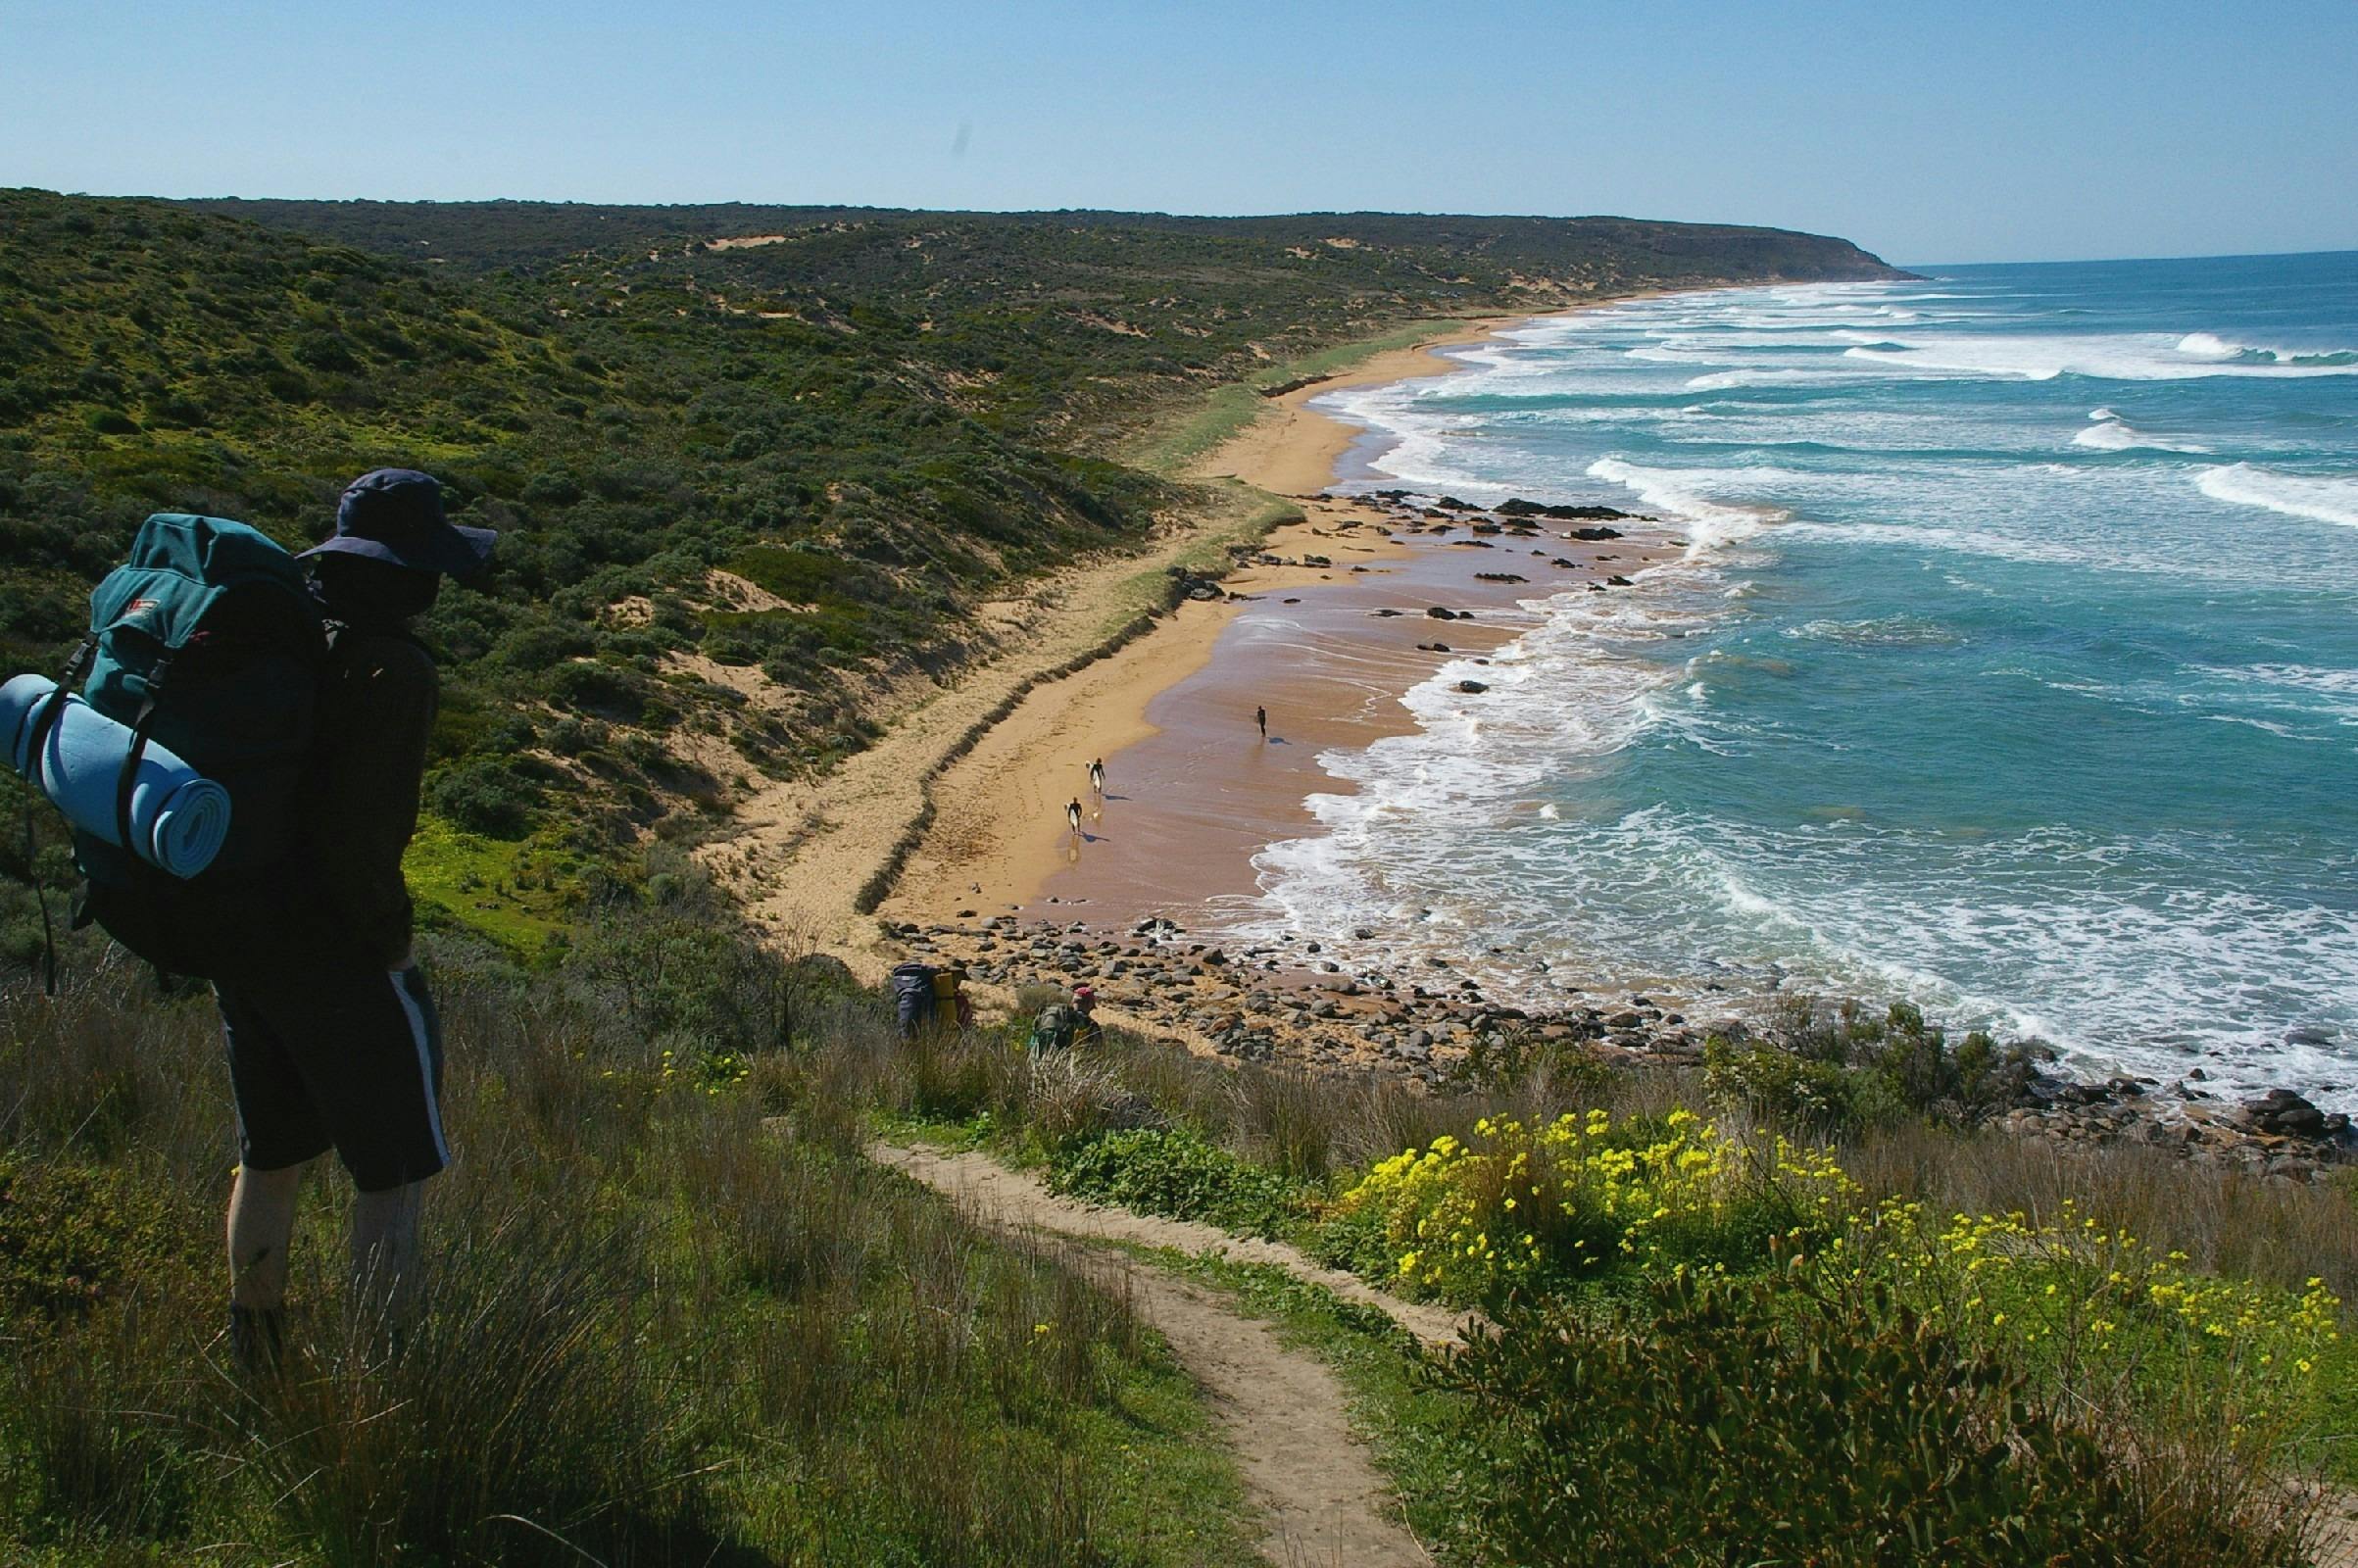 The coastline from the Heysen Trail